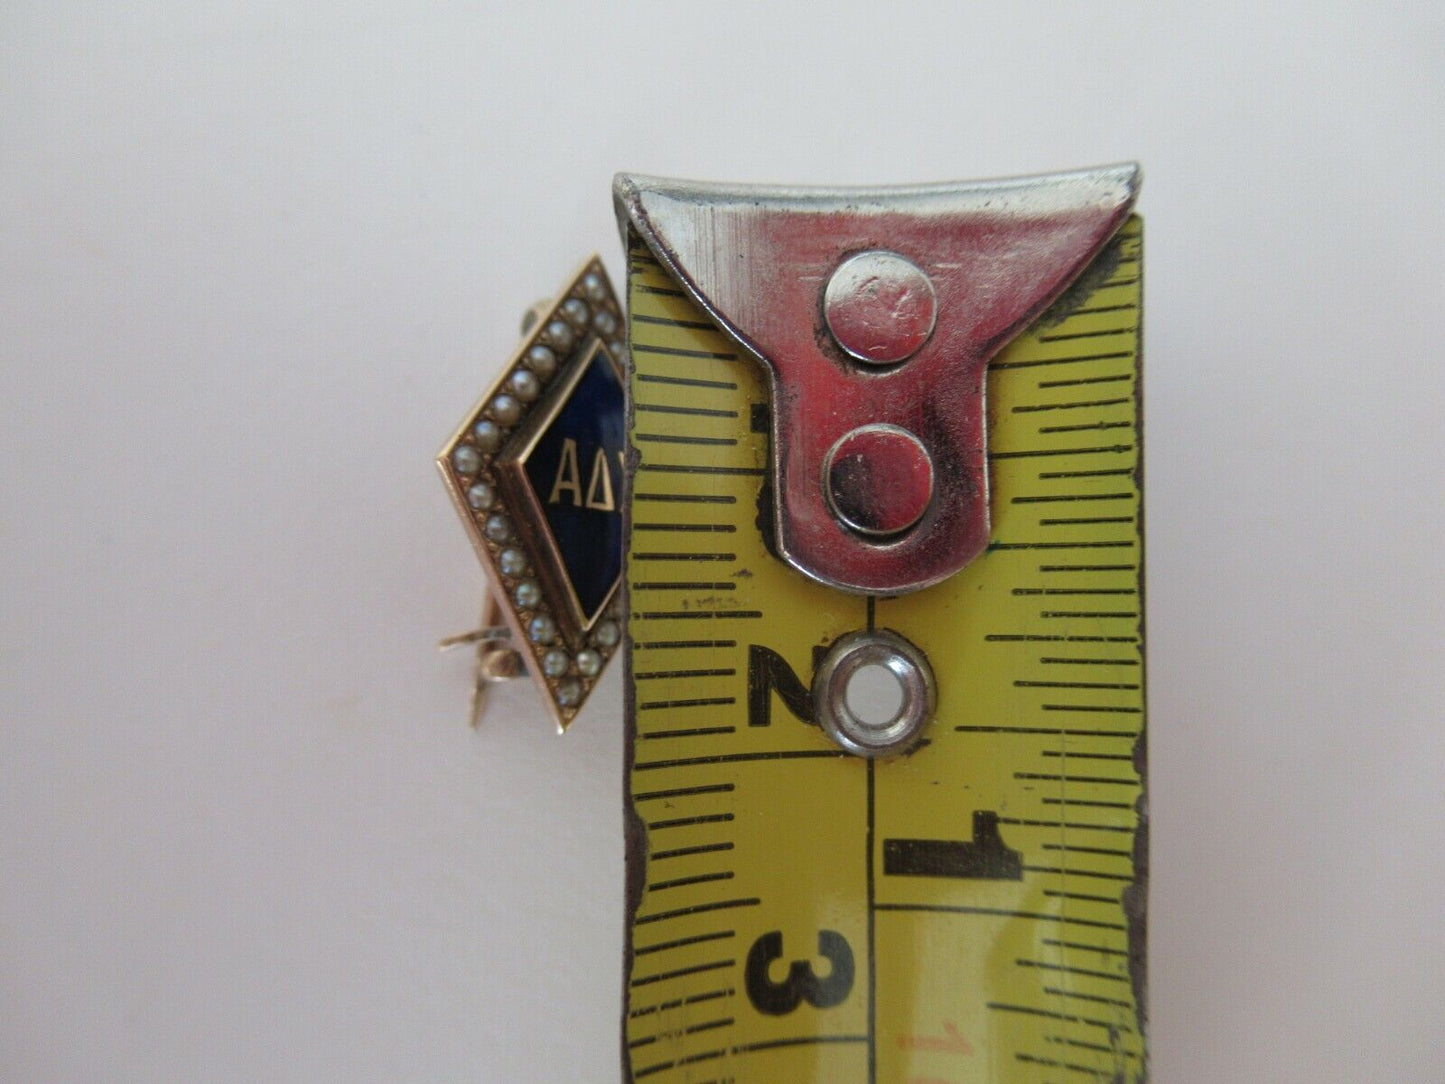 USA FRATERNITY PIN ALPHA DELTA SIGMA. MADE IN GOLD. 1907. NAMED. GAMMA